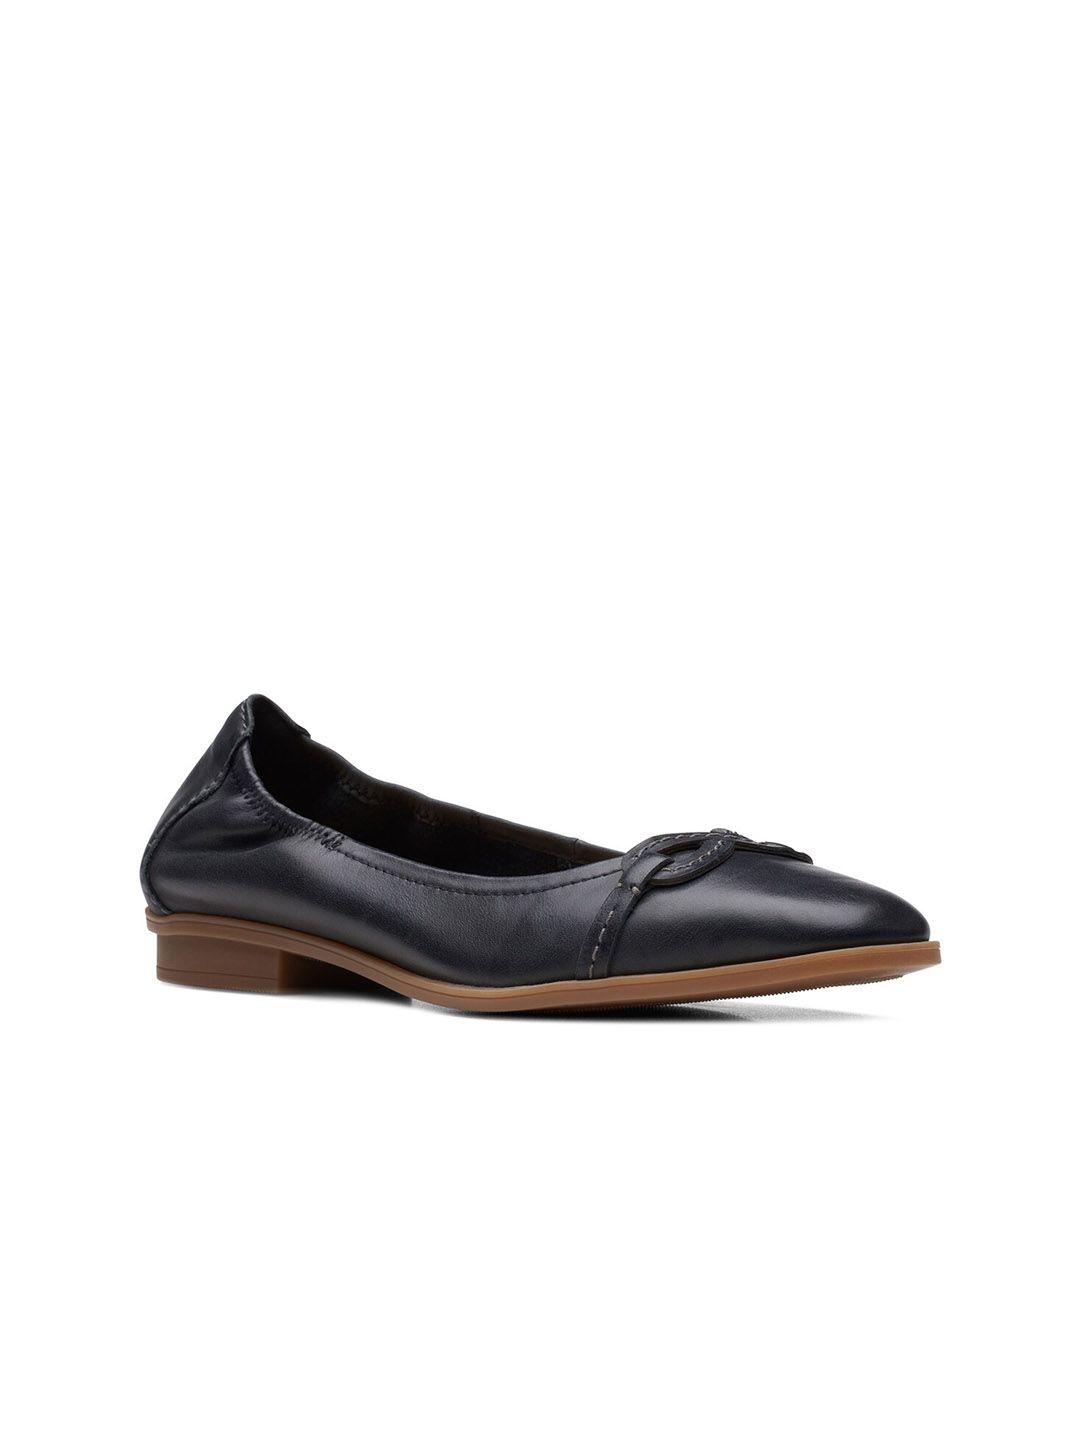 clarks-women-lyrical-rhyme-leather-ballerinas-with-bows